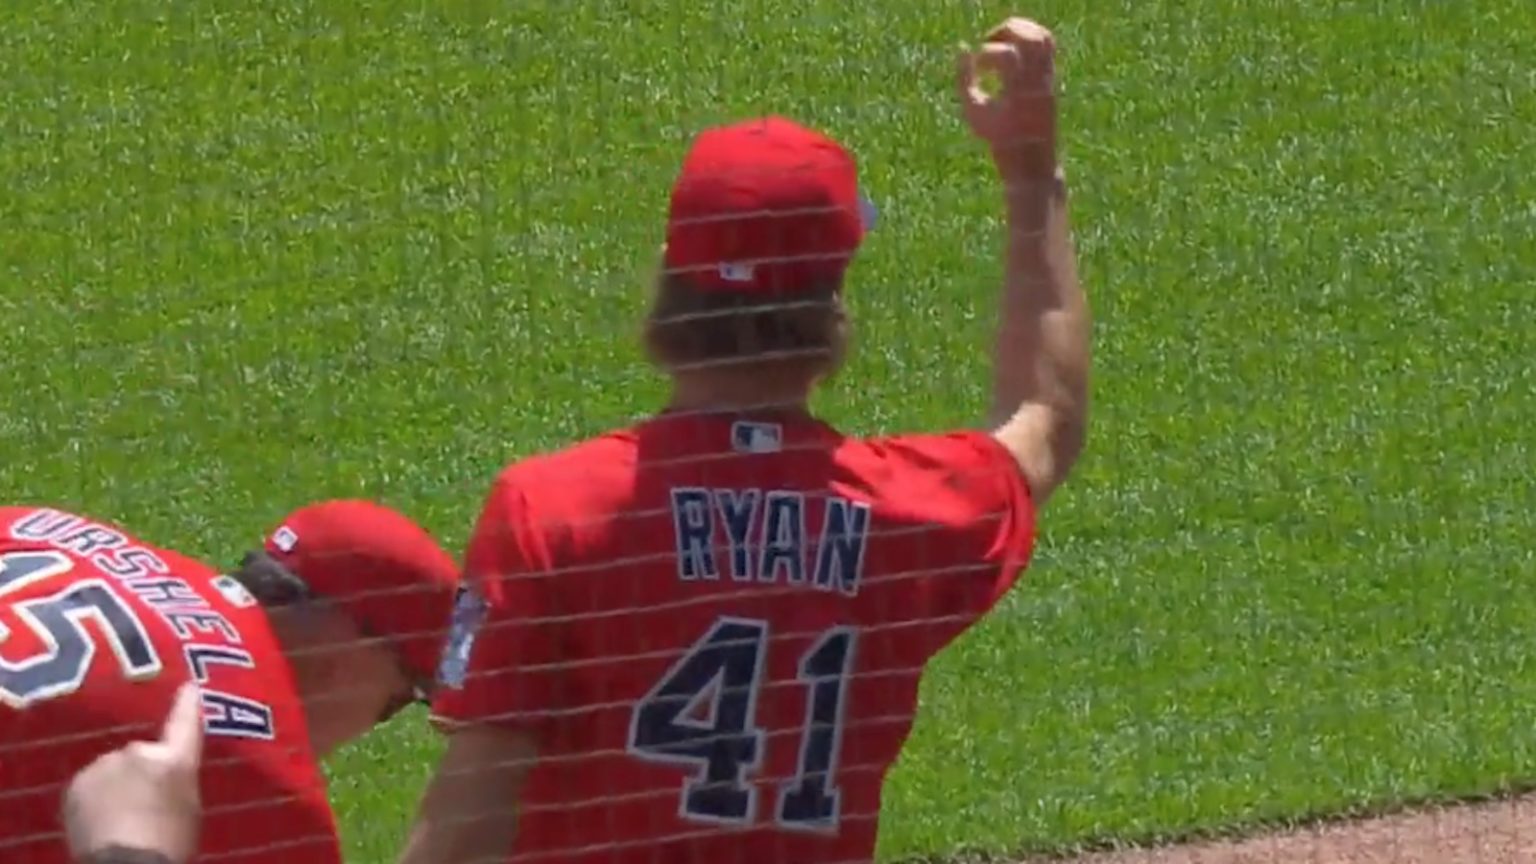 Twins pitcher Joe Ryan made sure to cash in on funny incentive